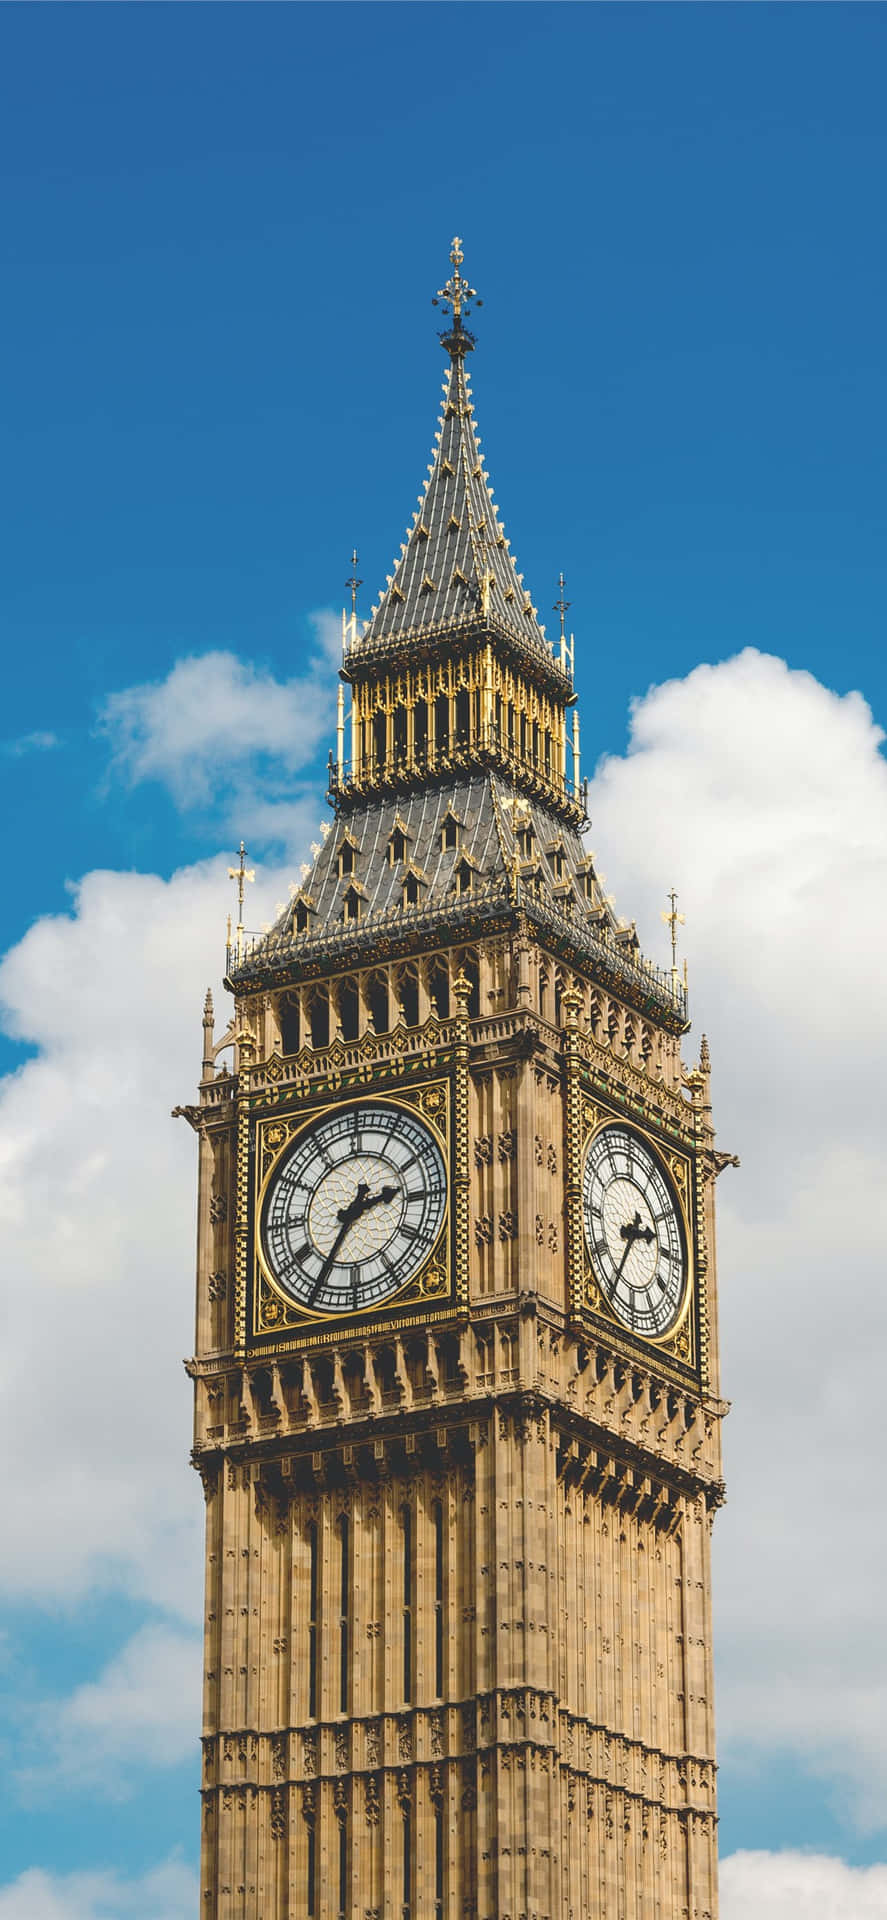 Enjoy a view of London while using your beloved iphone Wallpaper